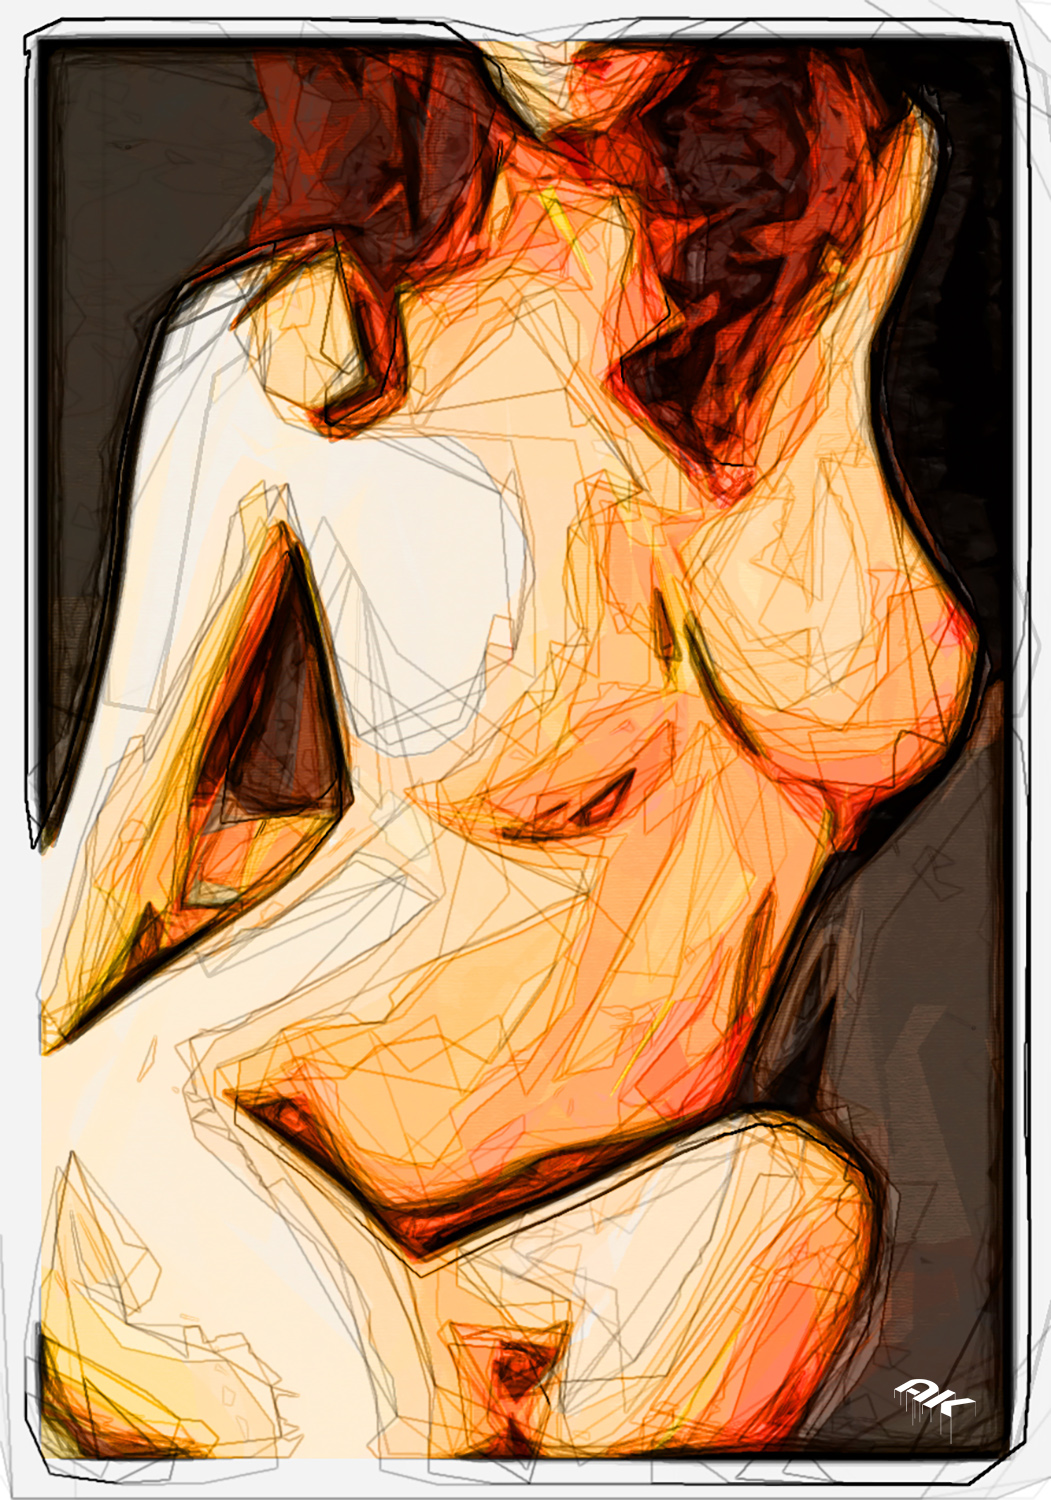 life-drawing-series-6-image-7-copyright-andrew-knutt